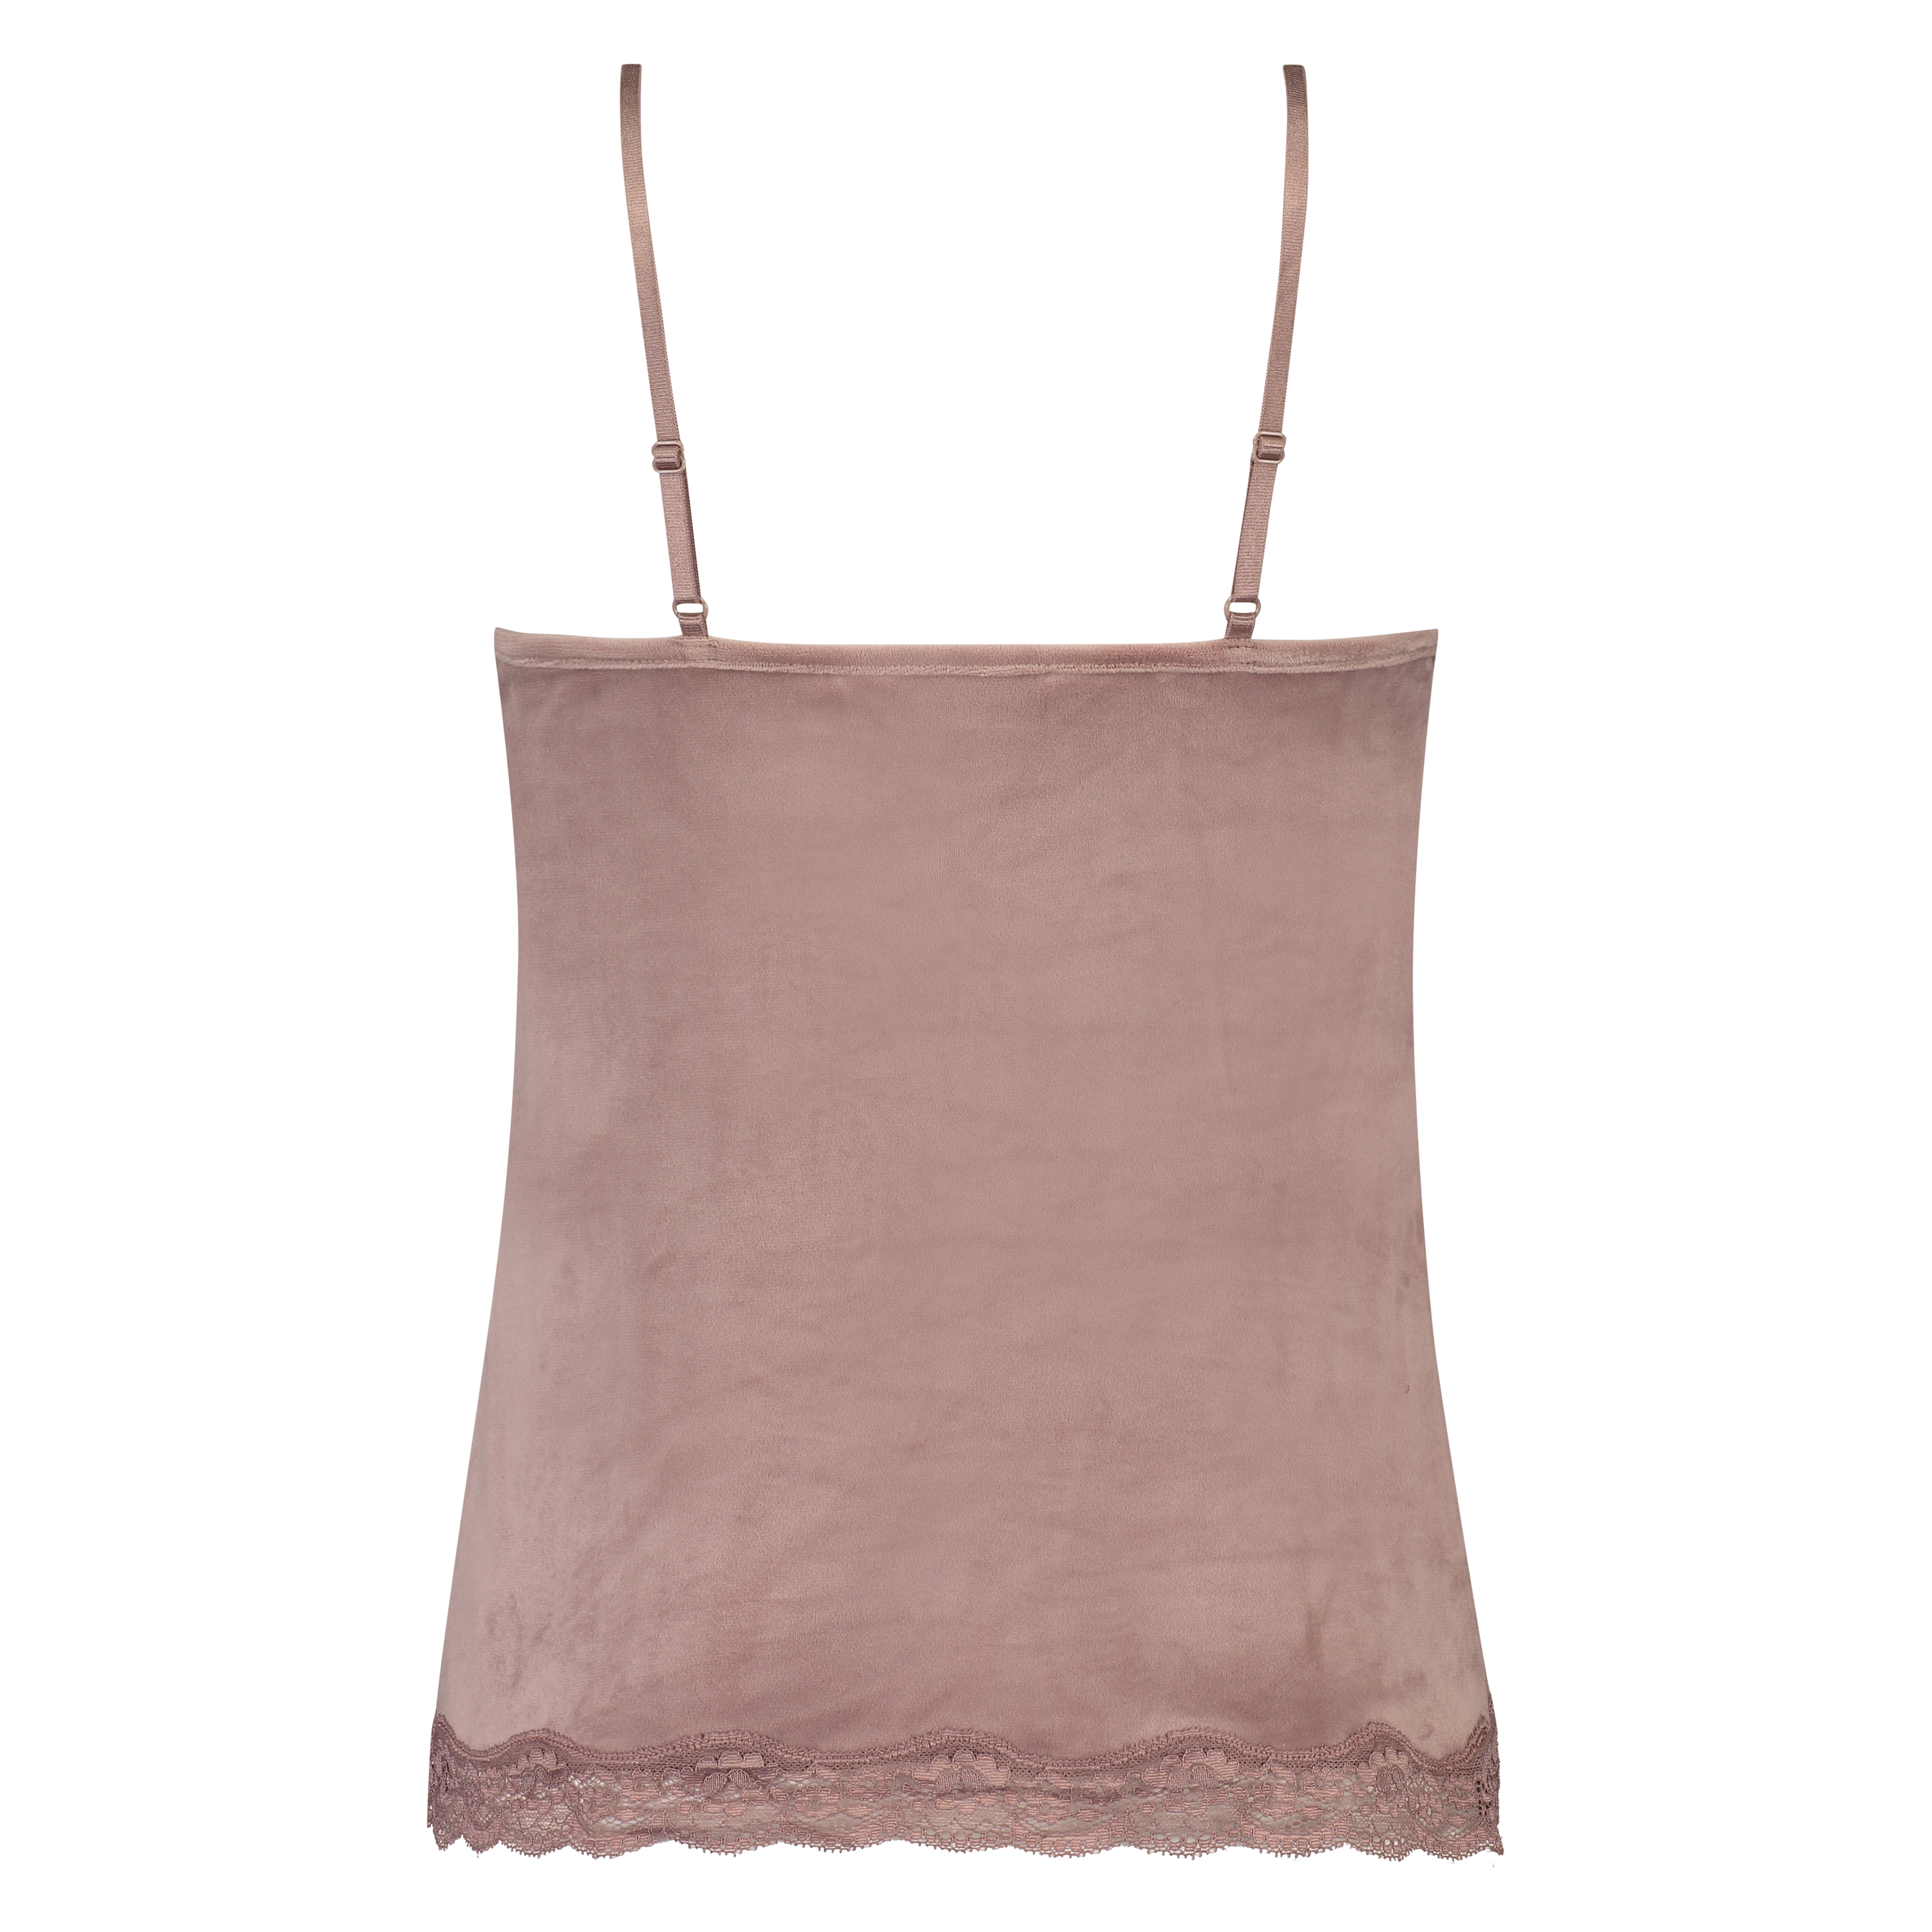 Velours Lace Cami Top, Pink, main